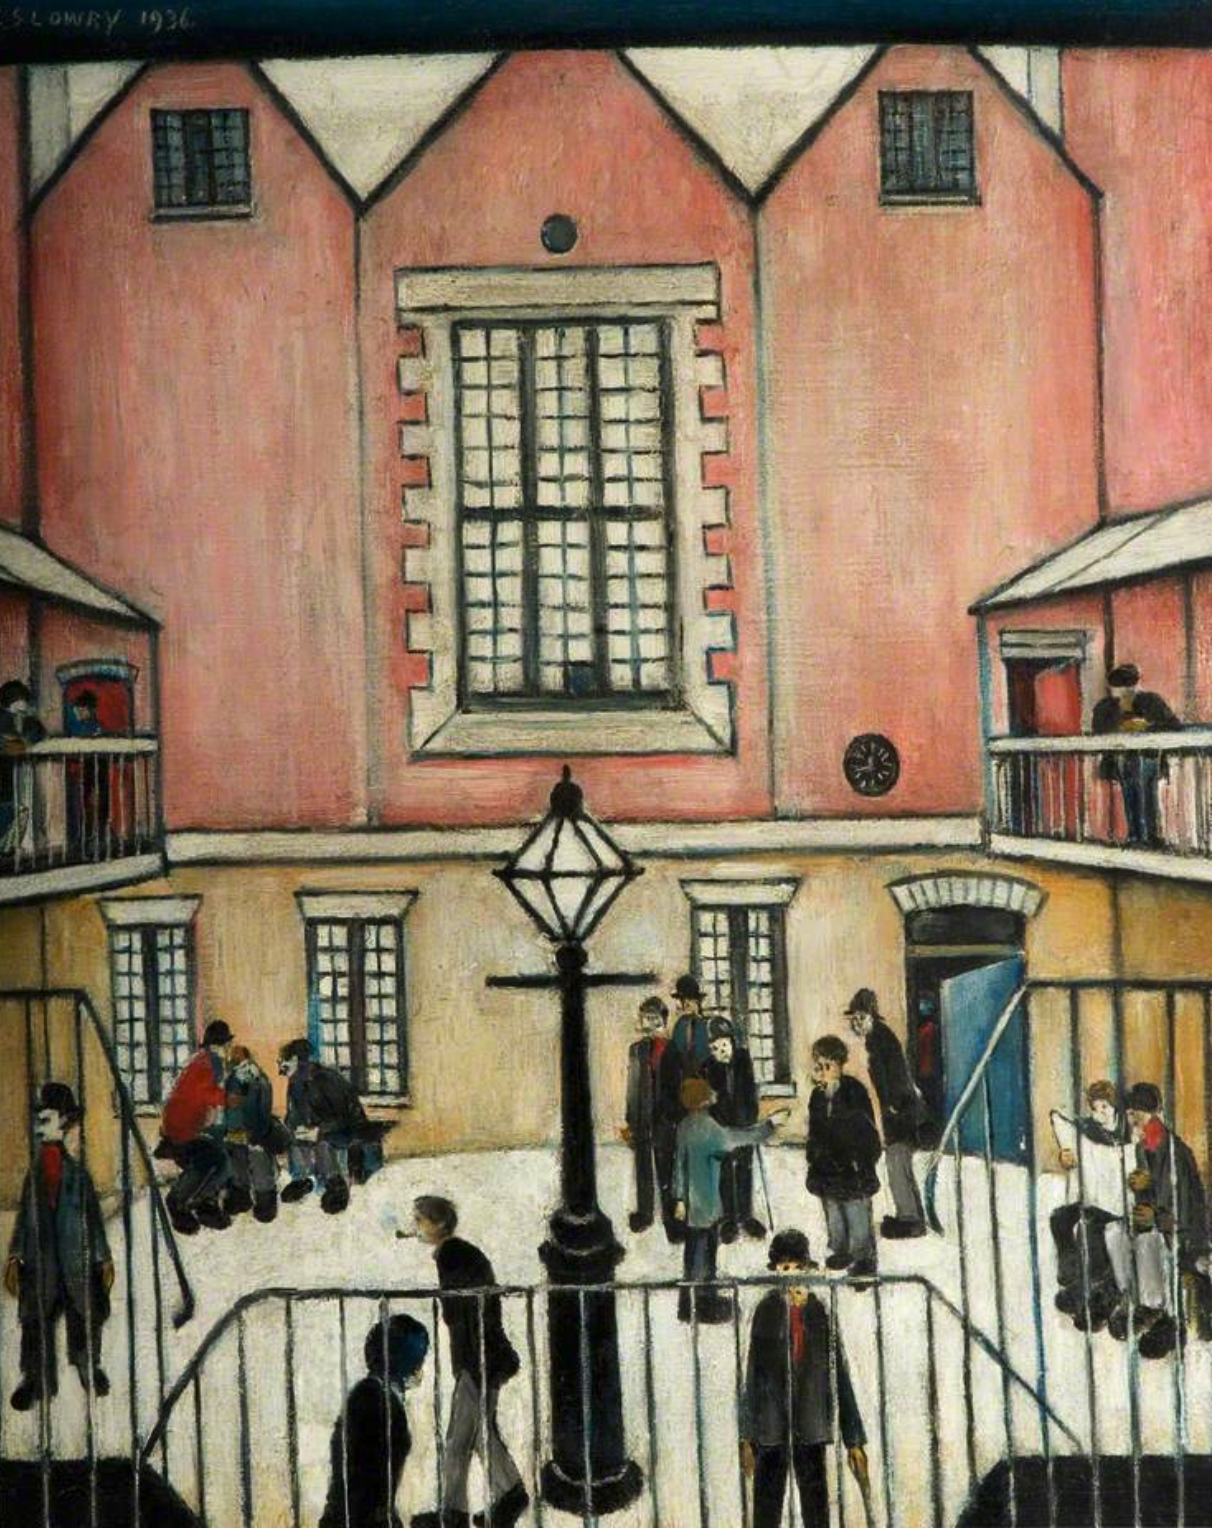 The Courtyard (1939) by Laurence Stephen Lowry (1887 - 1976), English artist.